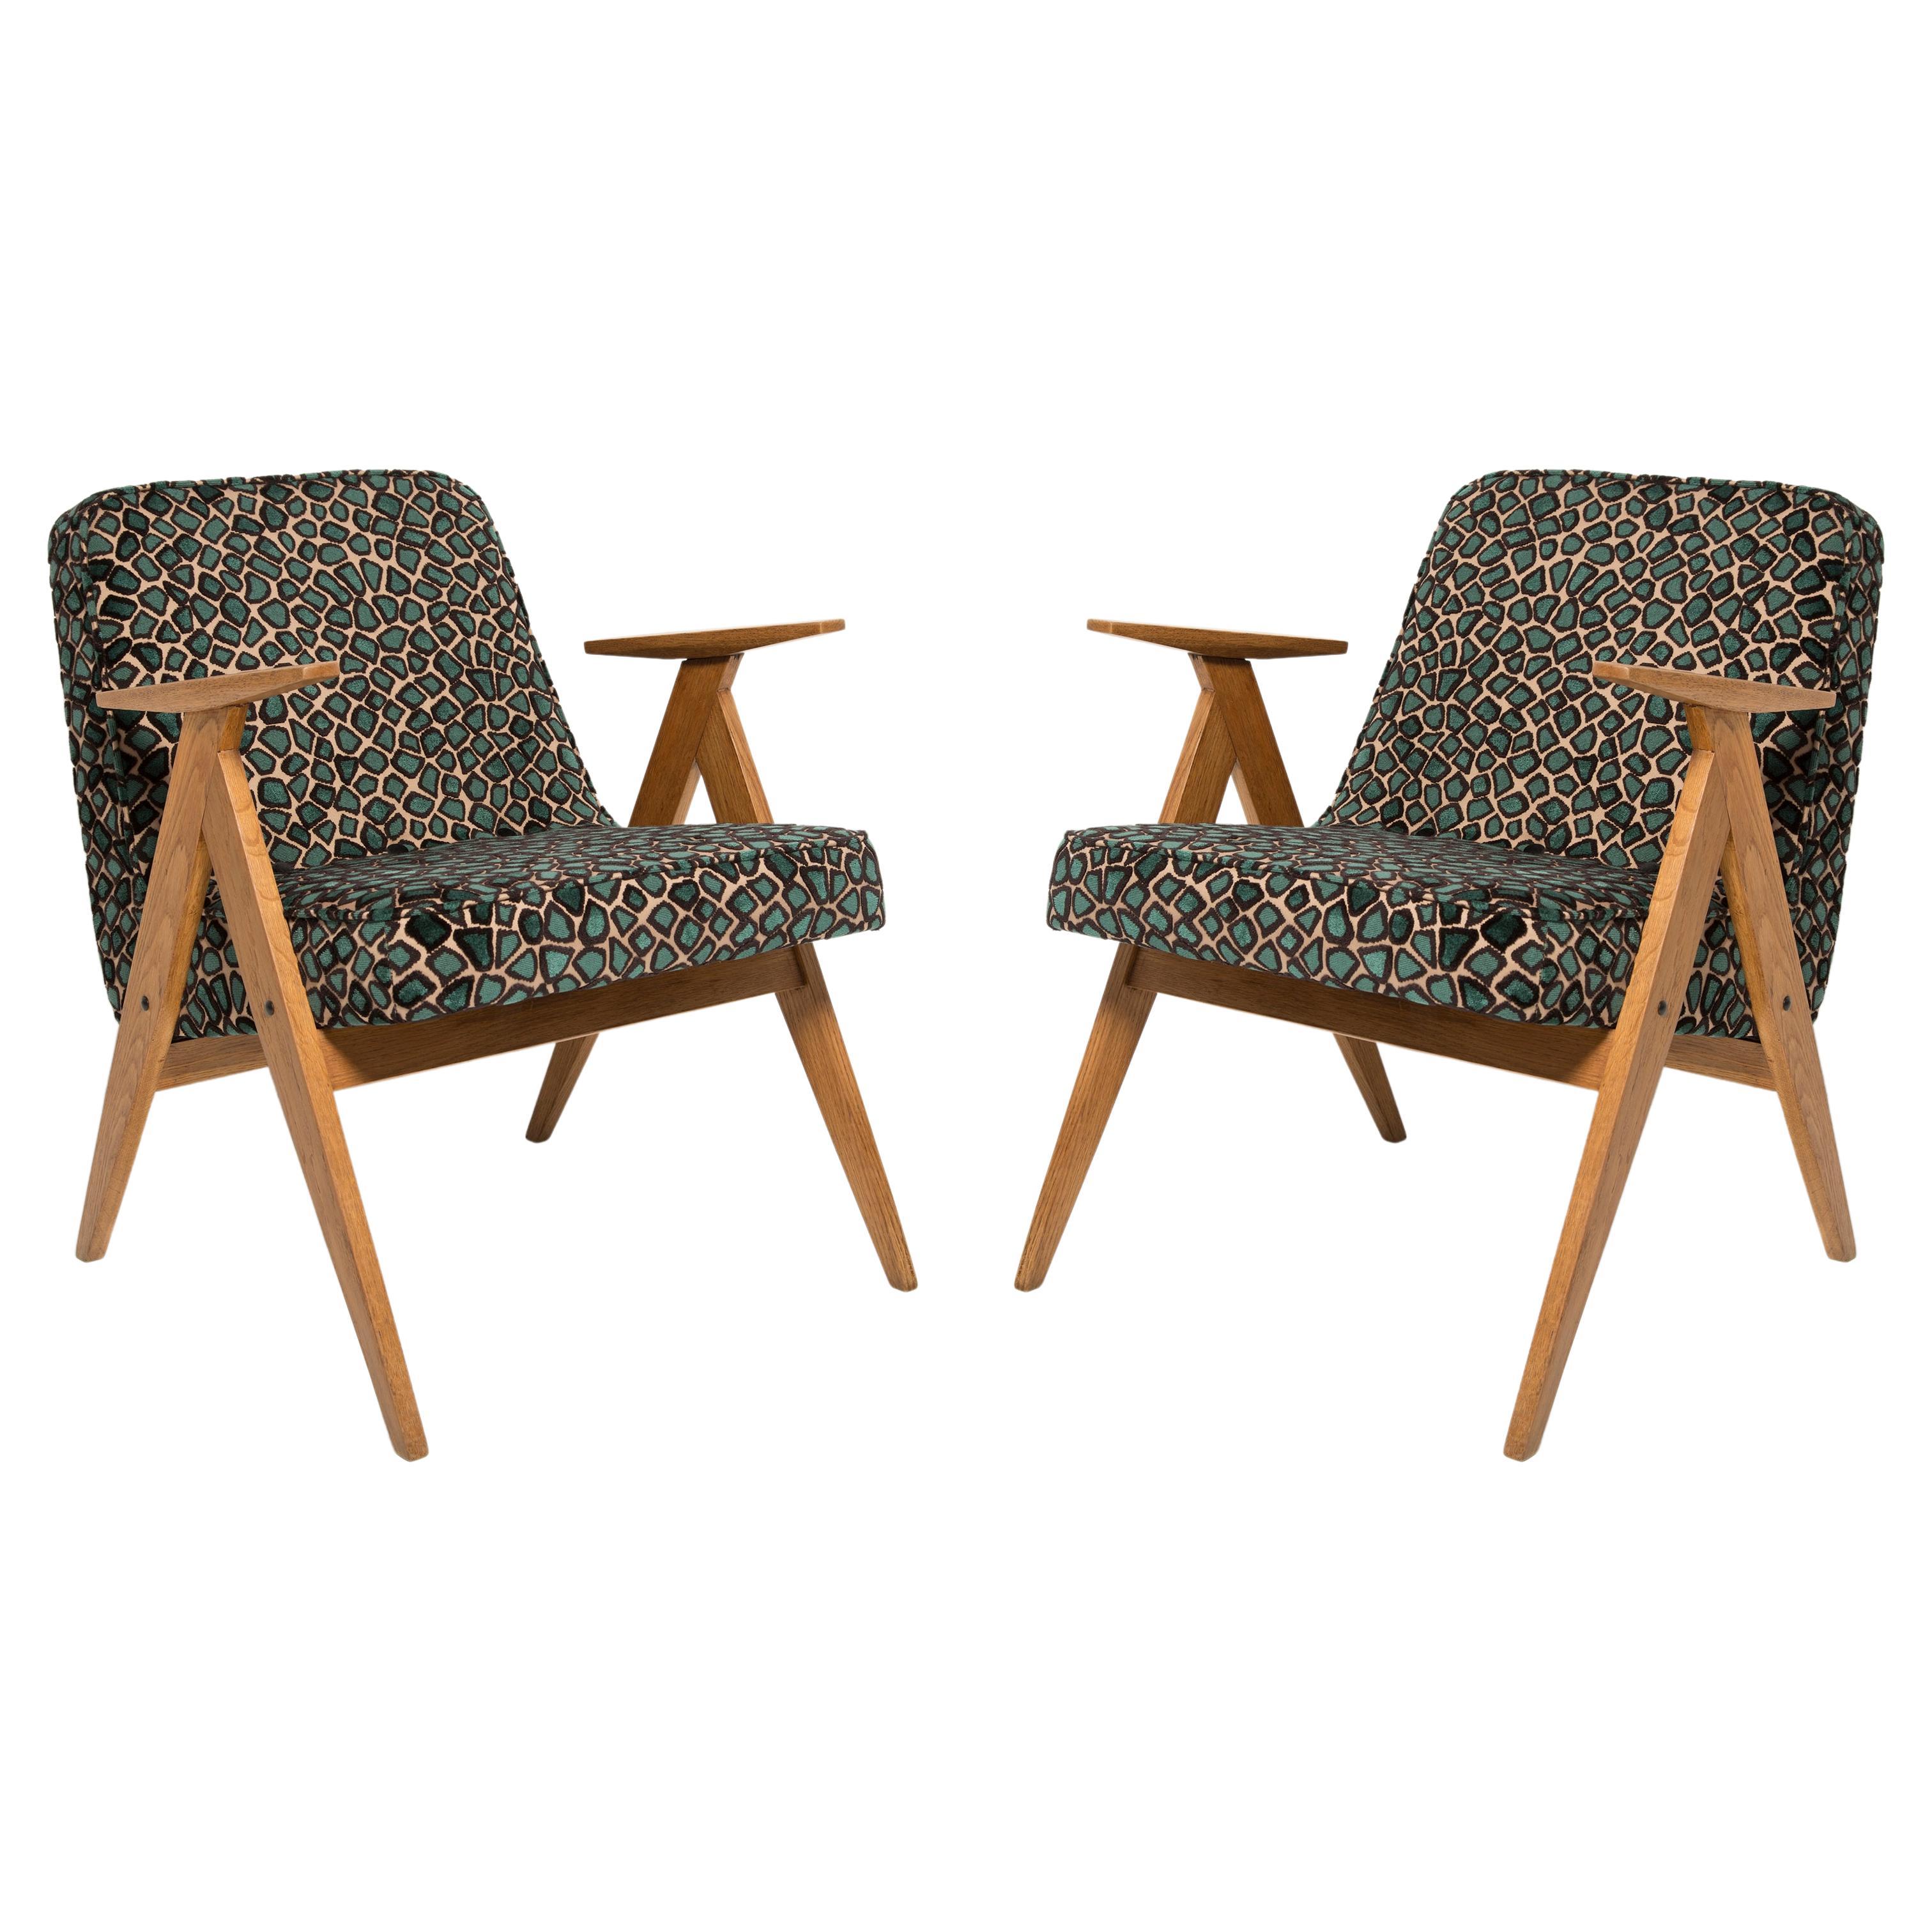 Two Mid Century 366 Armchairs in Leopard Velvet, by Chierowski, Europe, 1960s